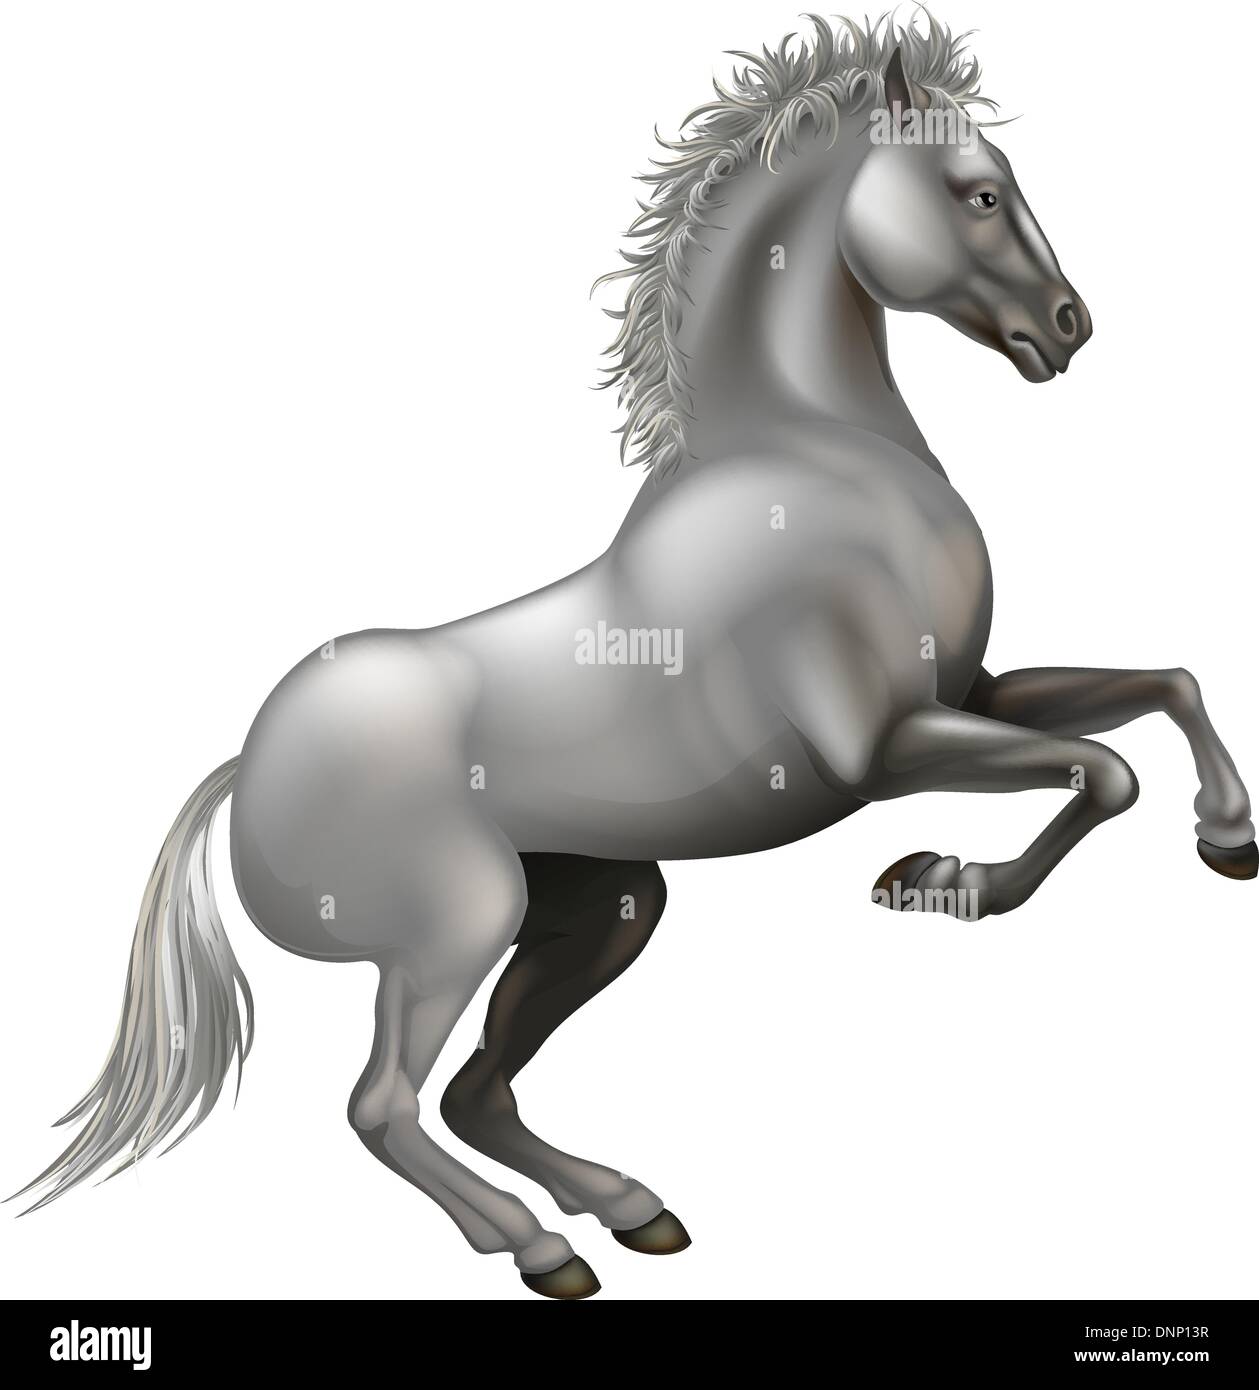 Illustration of a powerful white horse rearing on its hind legs Stock Vector